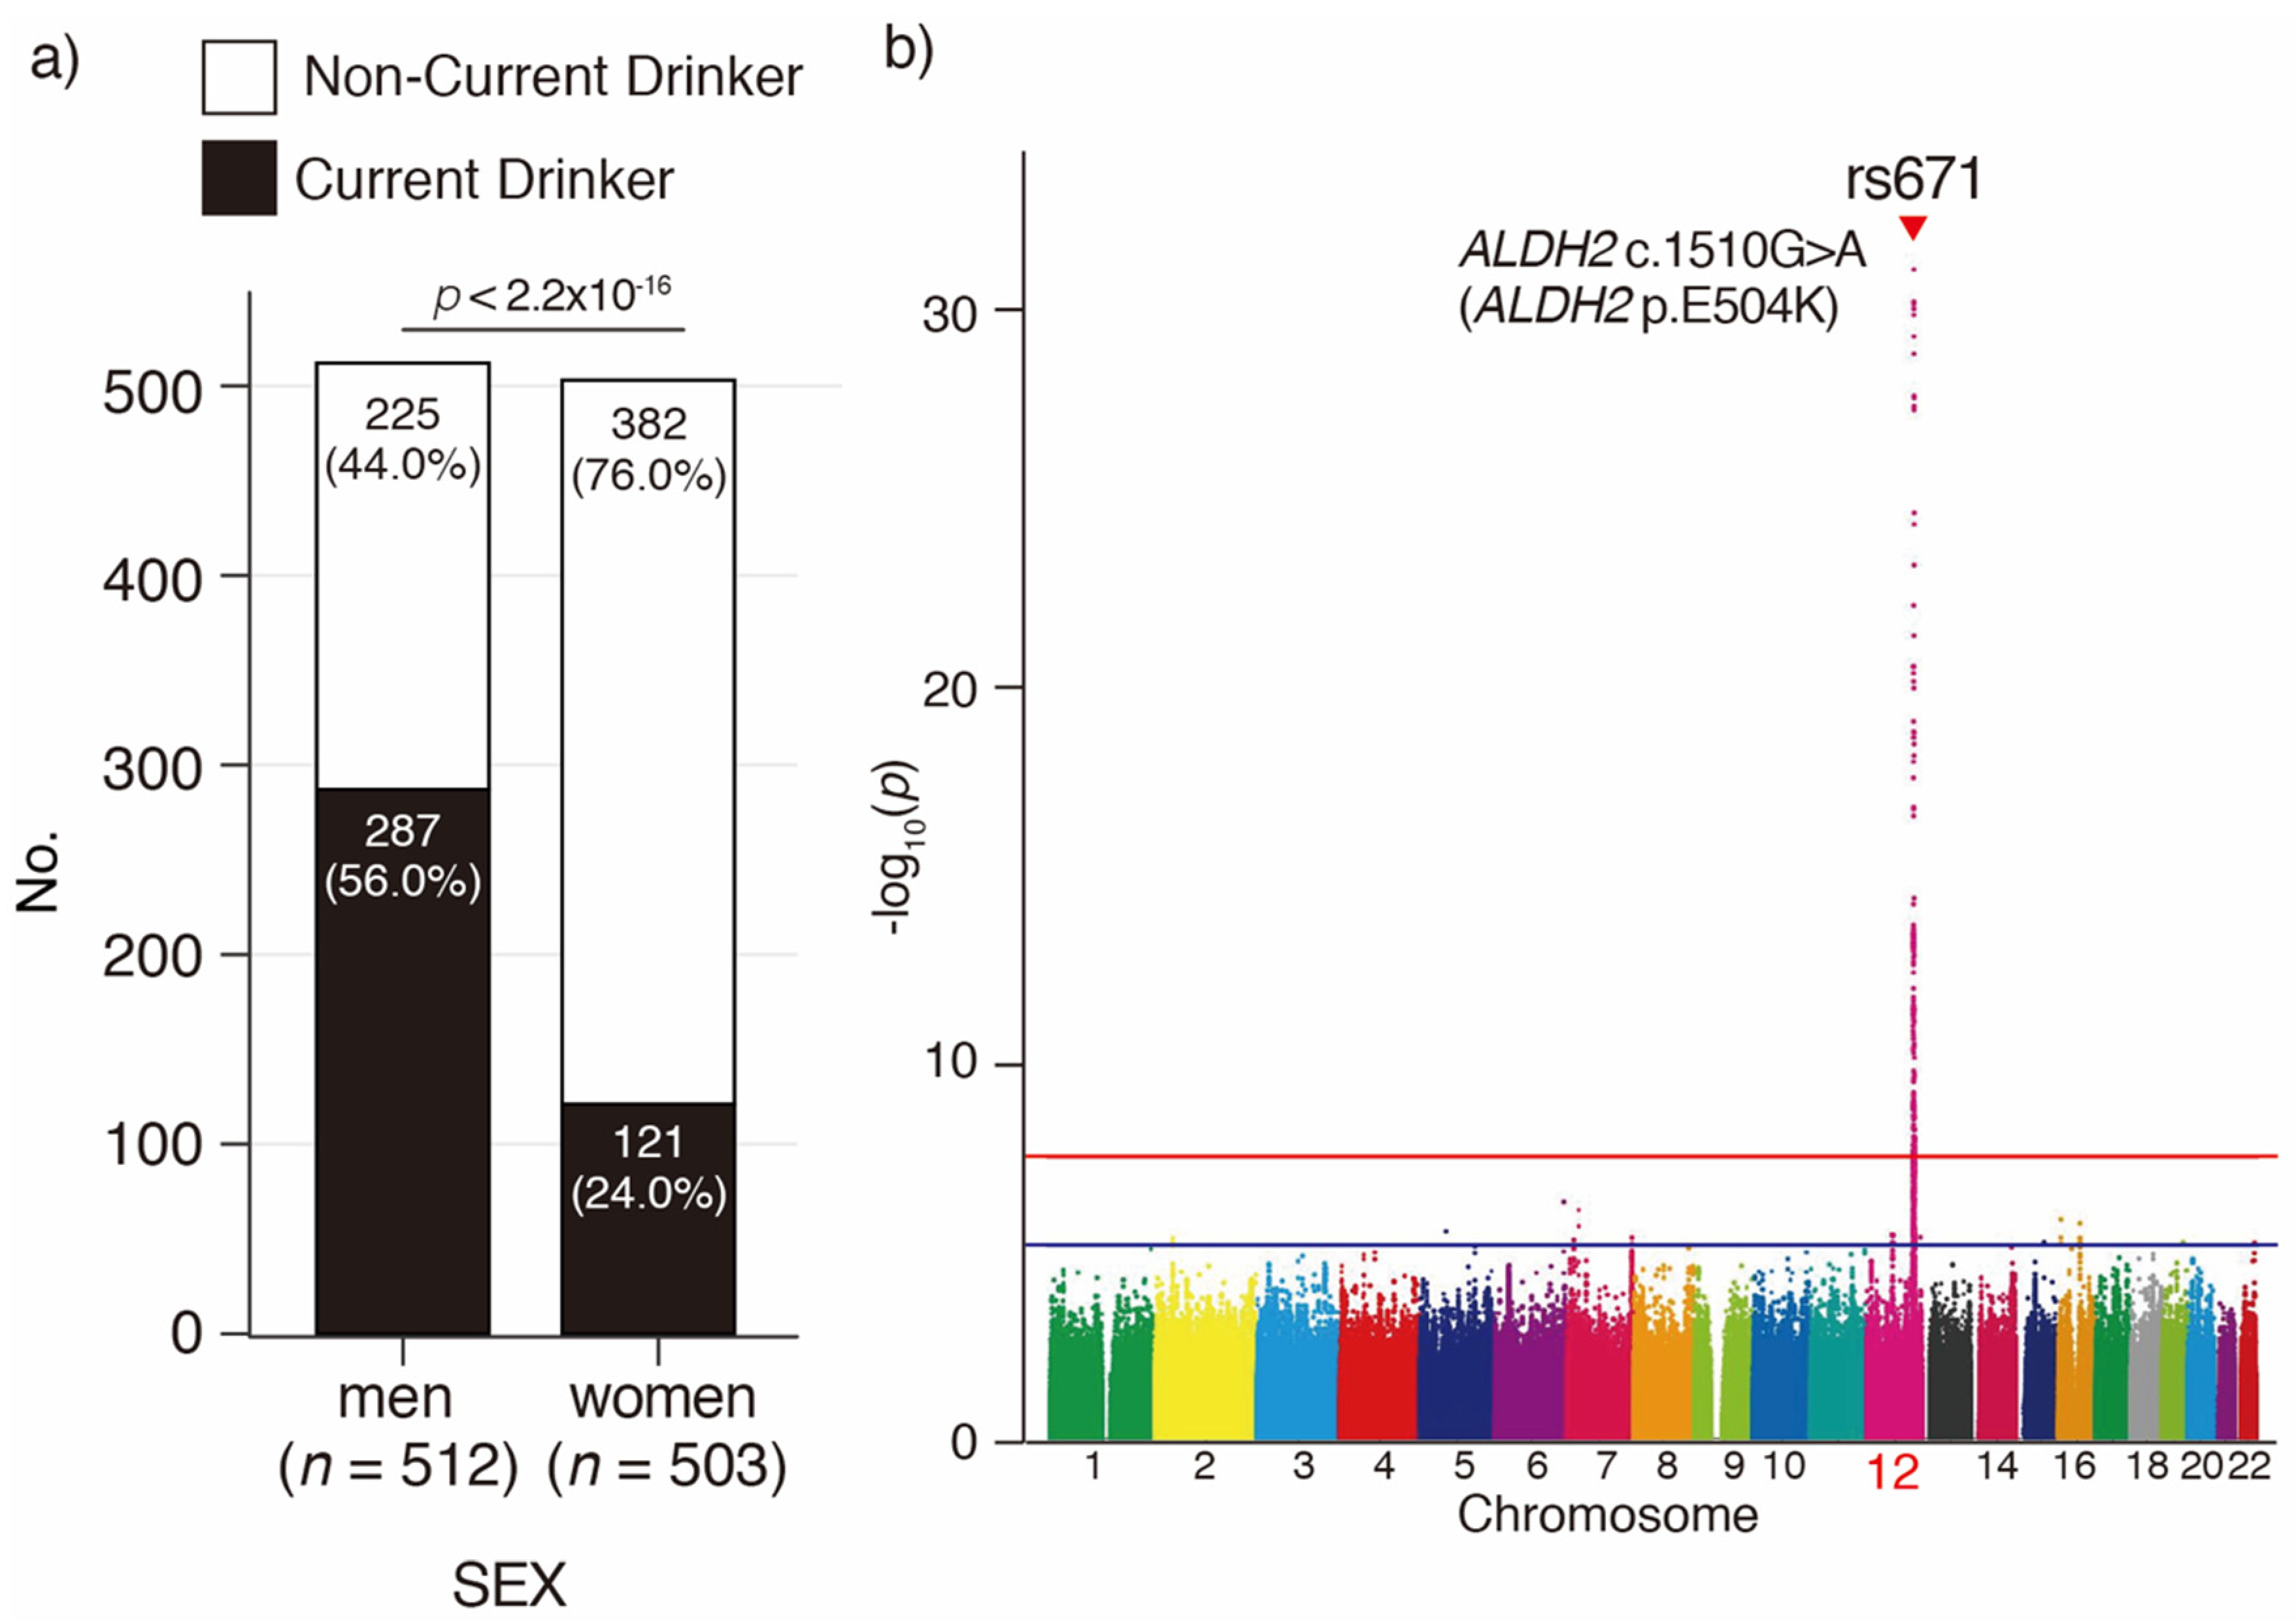 Wwwxxxsaxvideo - Genes | Free Full-Text | ALDH2 p.E504K Variation and Sex Are Major Factors  Associated with Current and Quitting Alcohol Drinking in Japanese Oldest Old